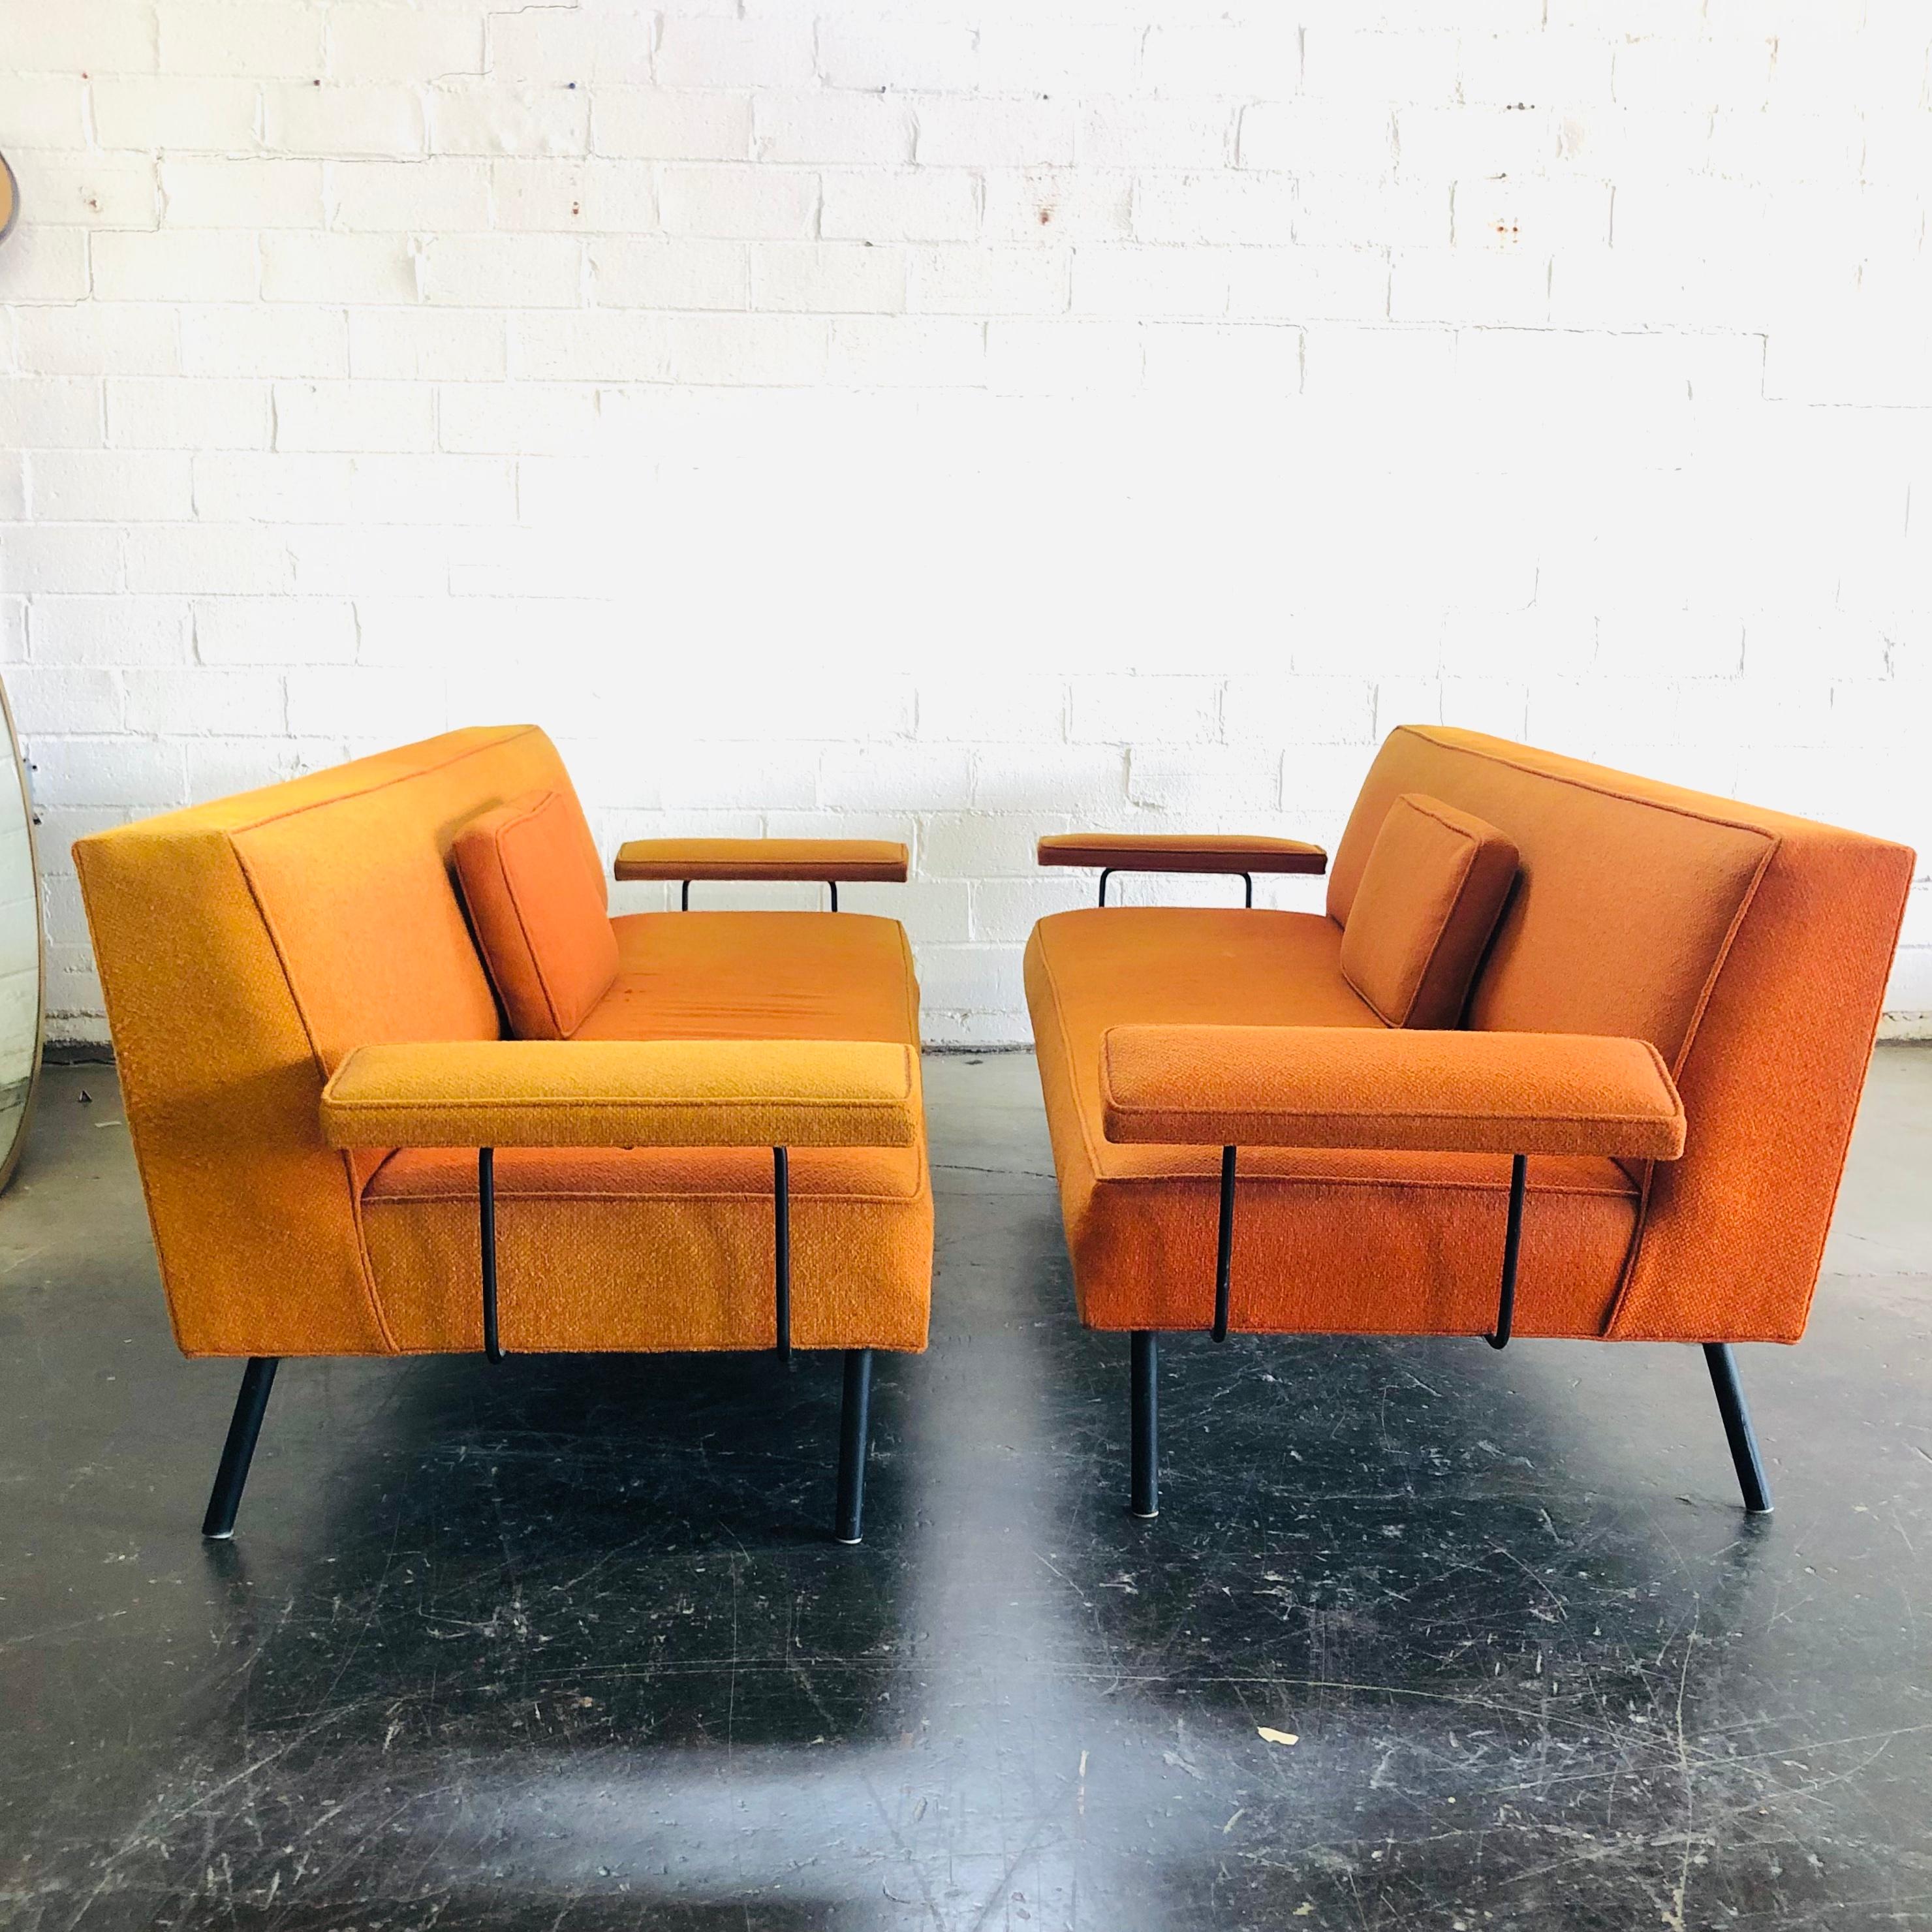 Stylish pair of vintage iron frame daybeds/sofas by George Nelson for Herman Miller. Good structural condition, upholstery shows wear and fading - reupholstery is recommended. 